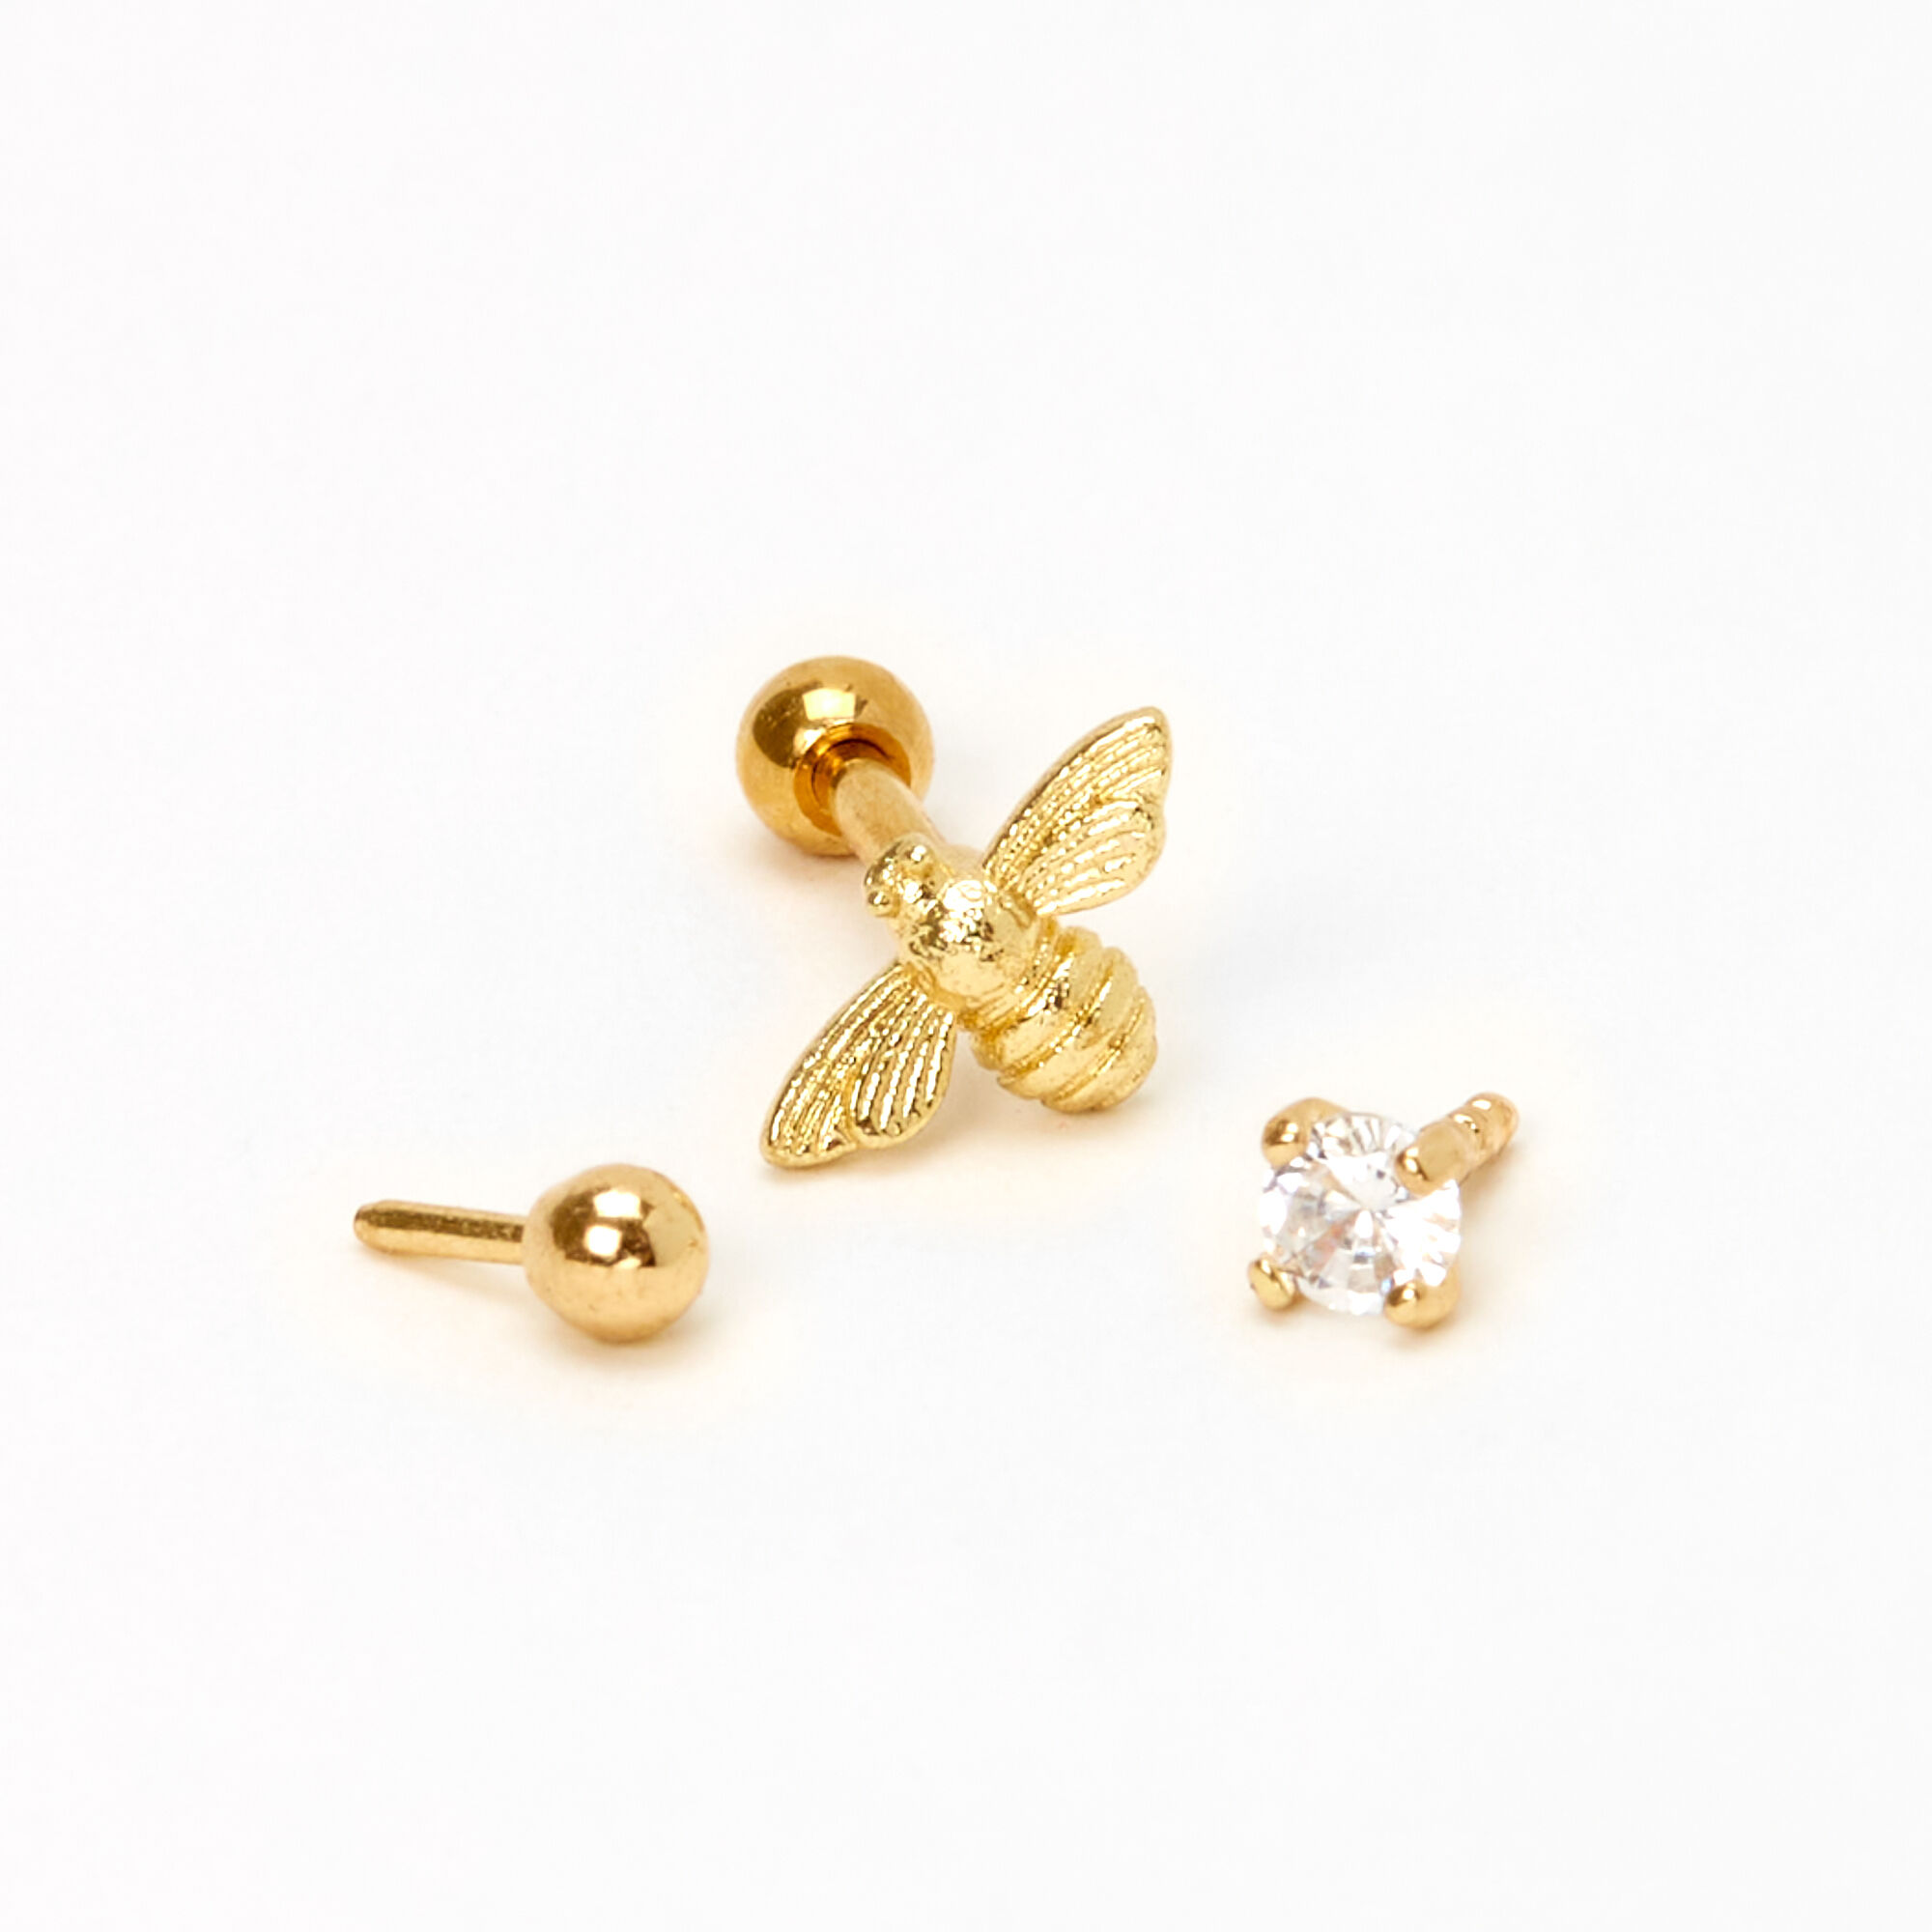 View Claires Tone 16G Bee Crystal Ball Cartilage Stud Earrings 3 Pack Gold information